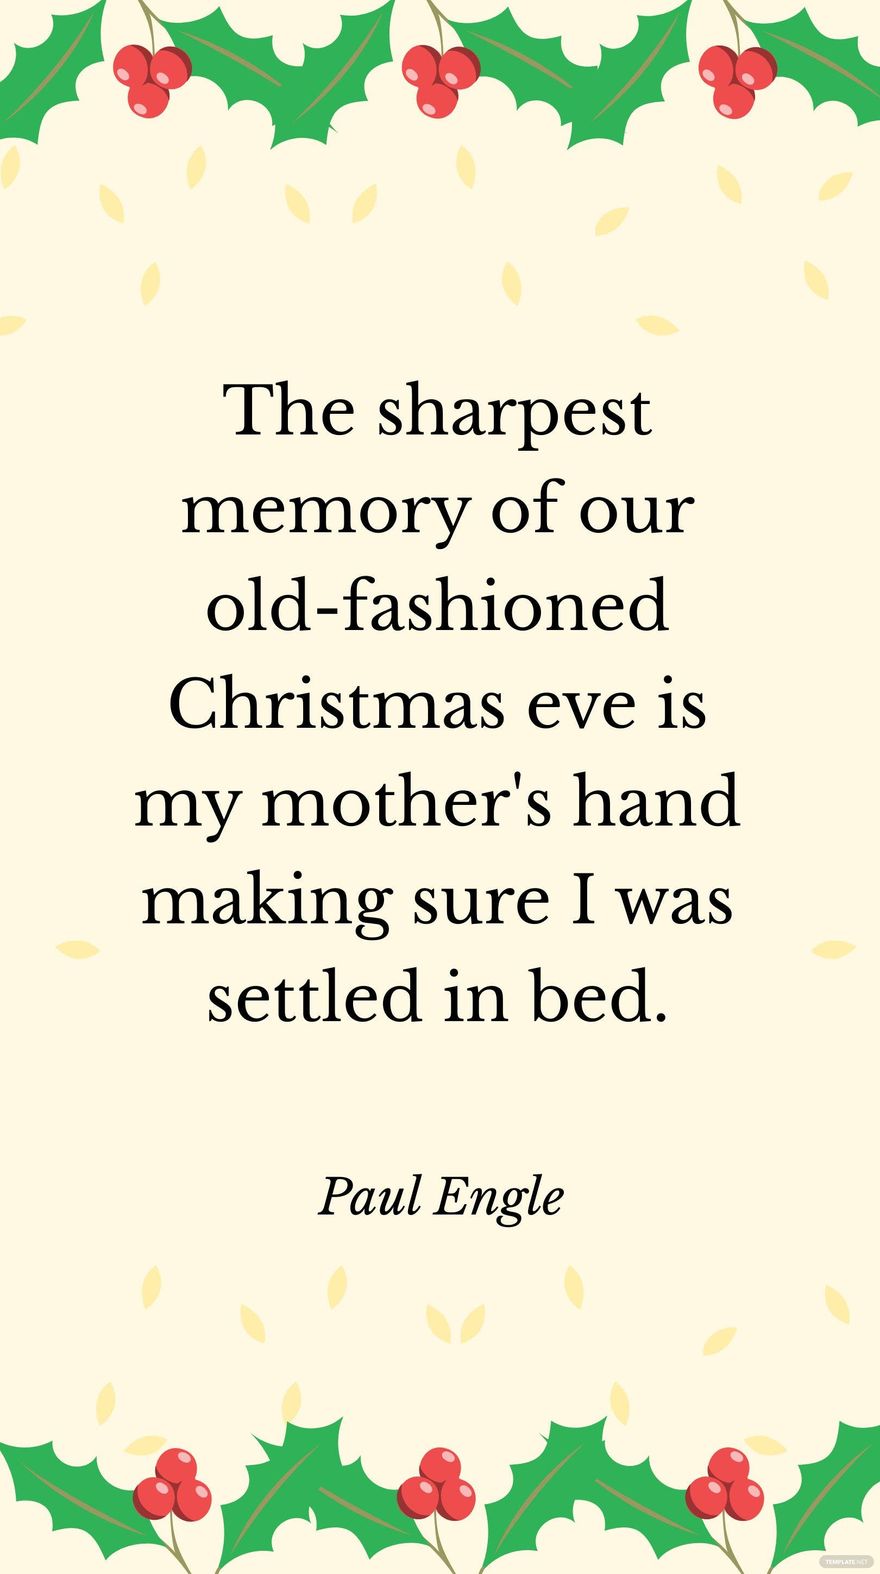 Free Paul Engle - The sharpest memory of our old-fashioned Christmas eve is my mother's hand making sure I was settled in bed.